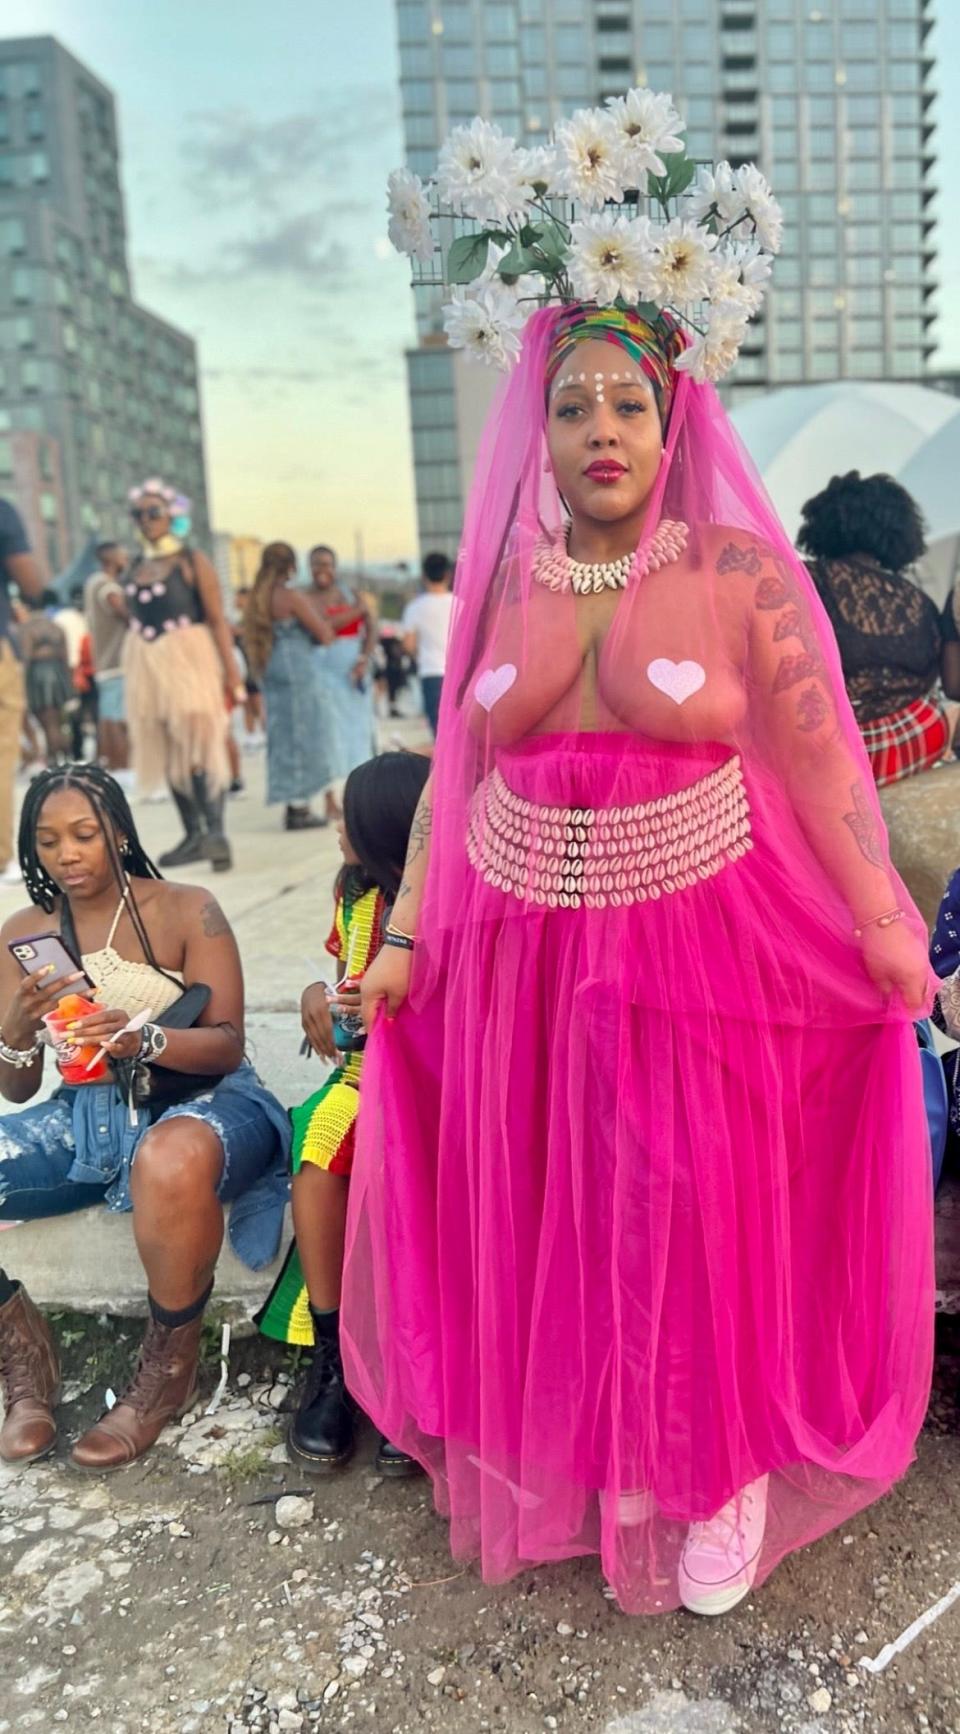 Woman in all pink see-through tulle outfit with flower headpiece at Afropunk festival